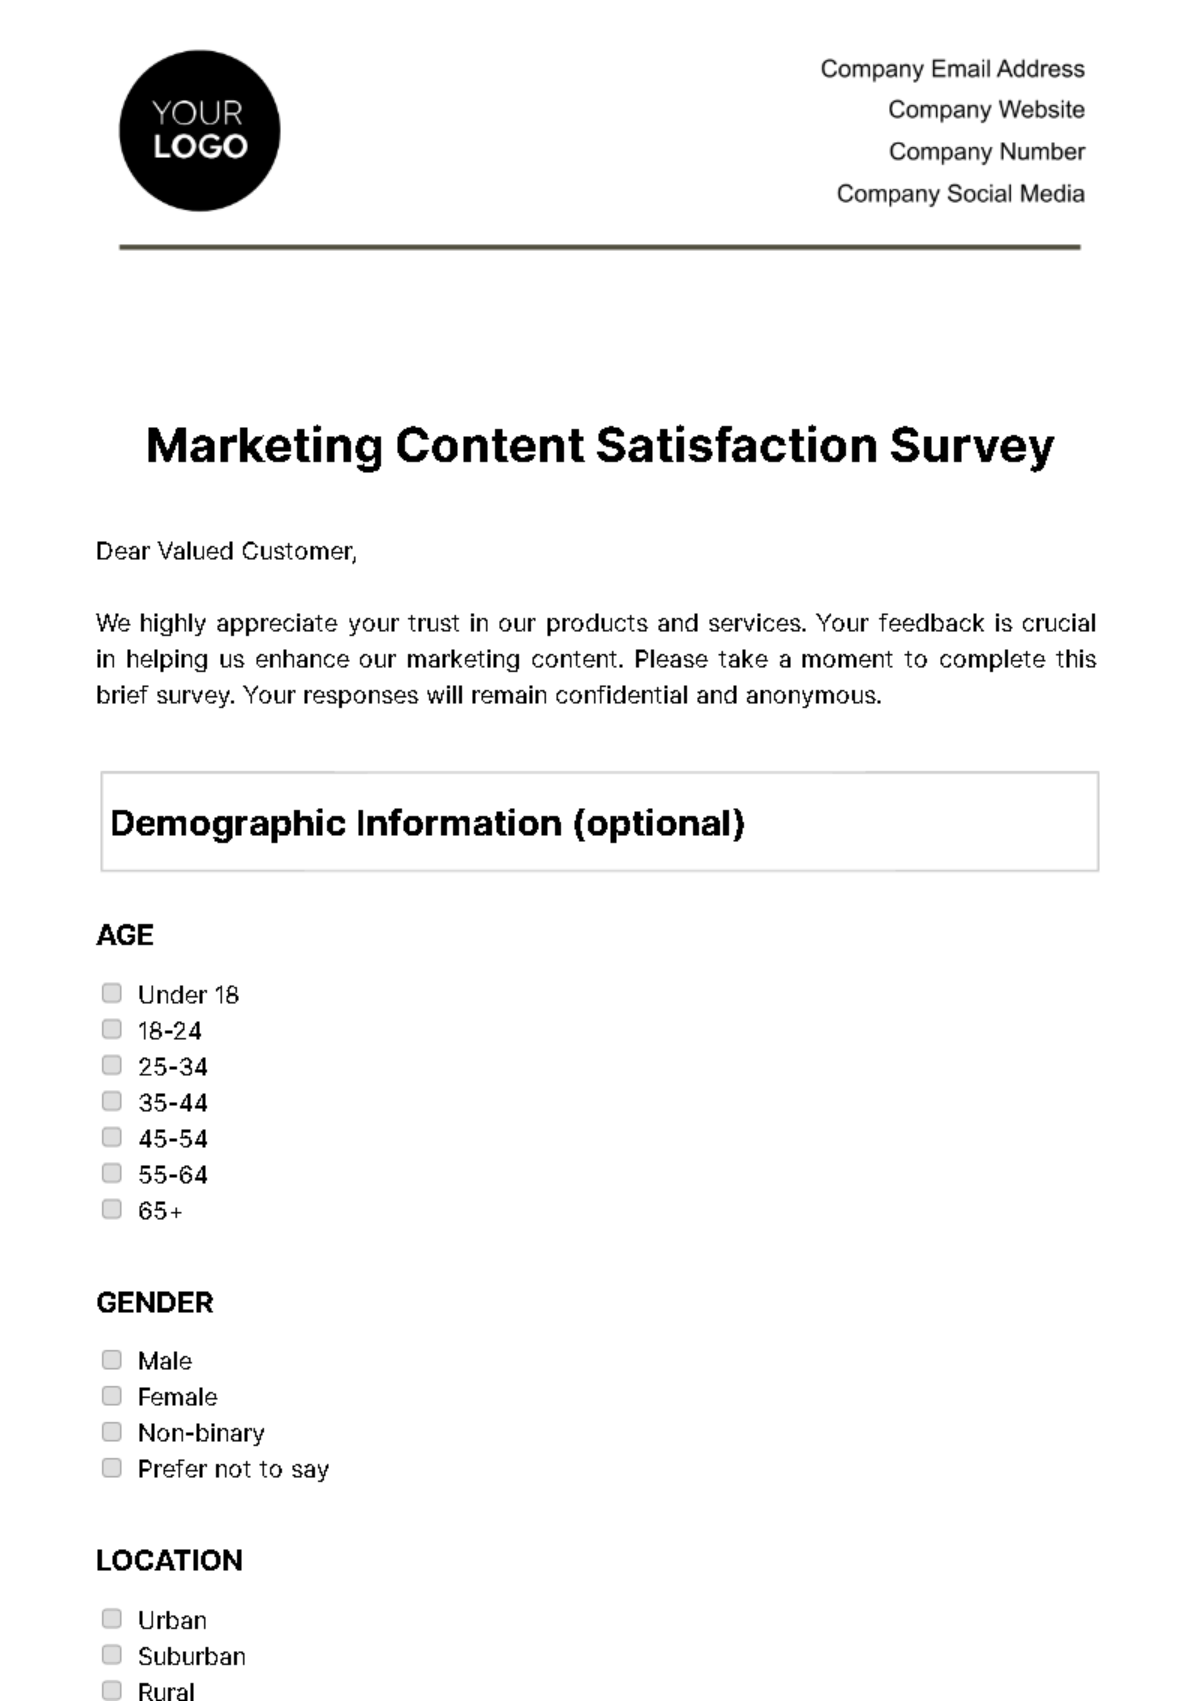 Free Marketing Content Satisfaction Survey Template